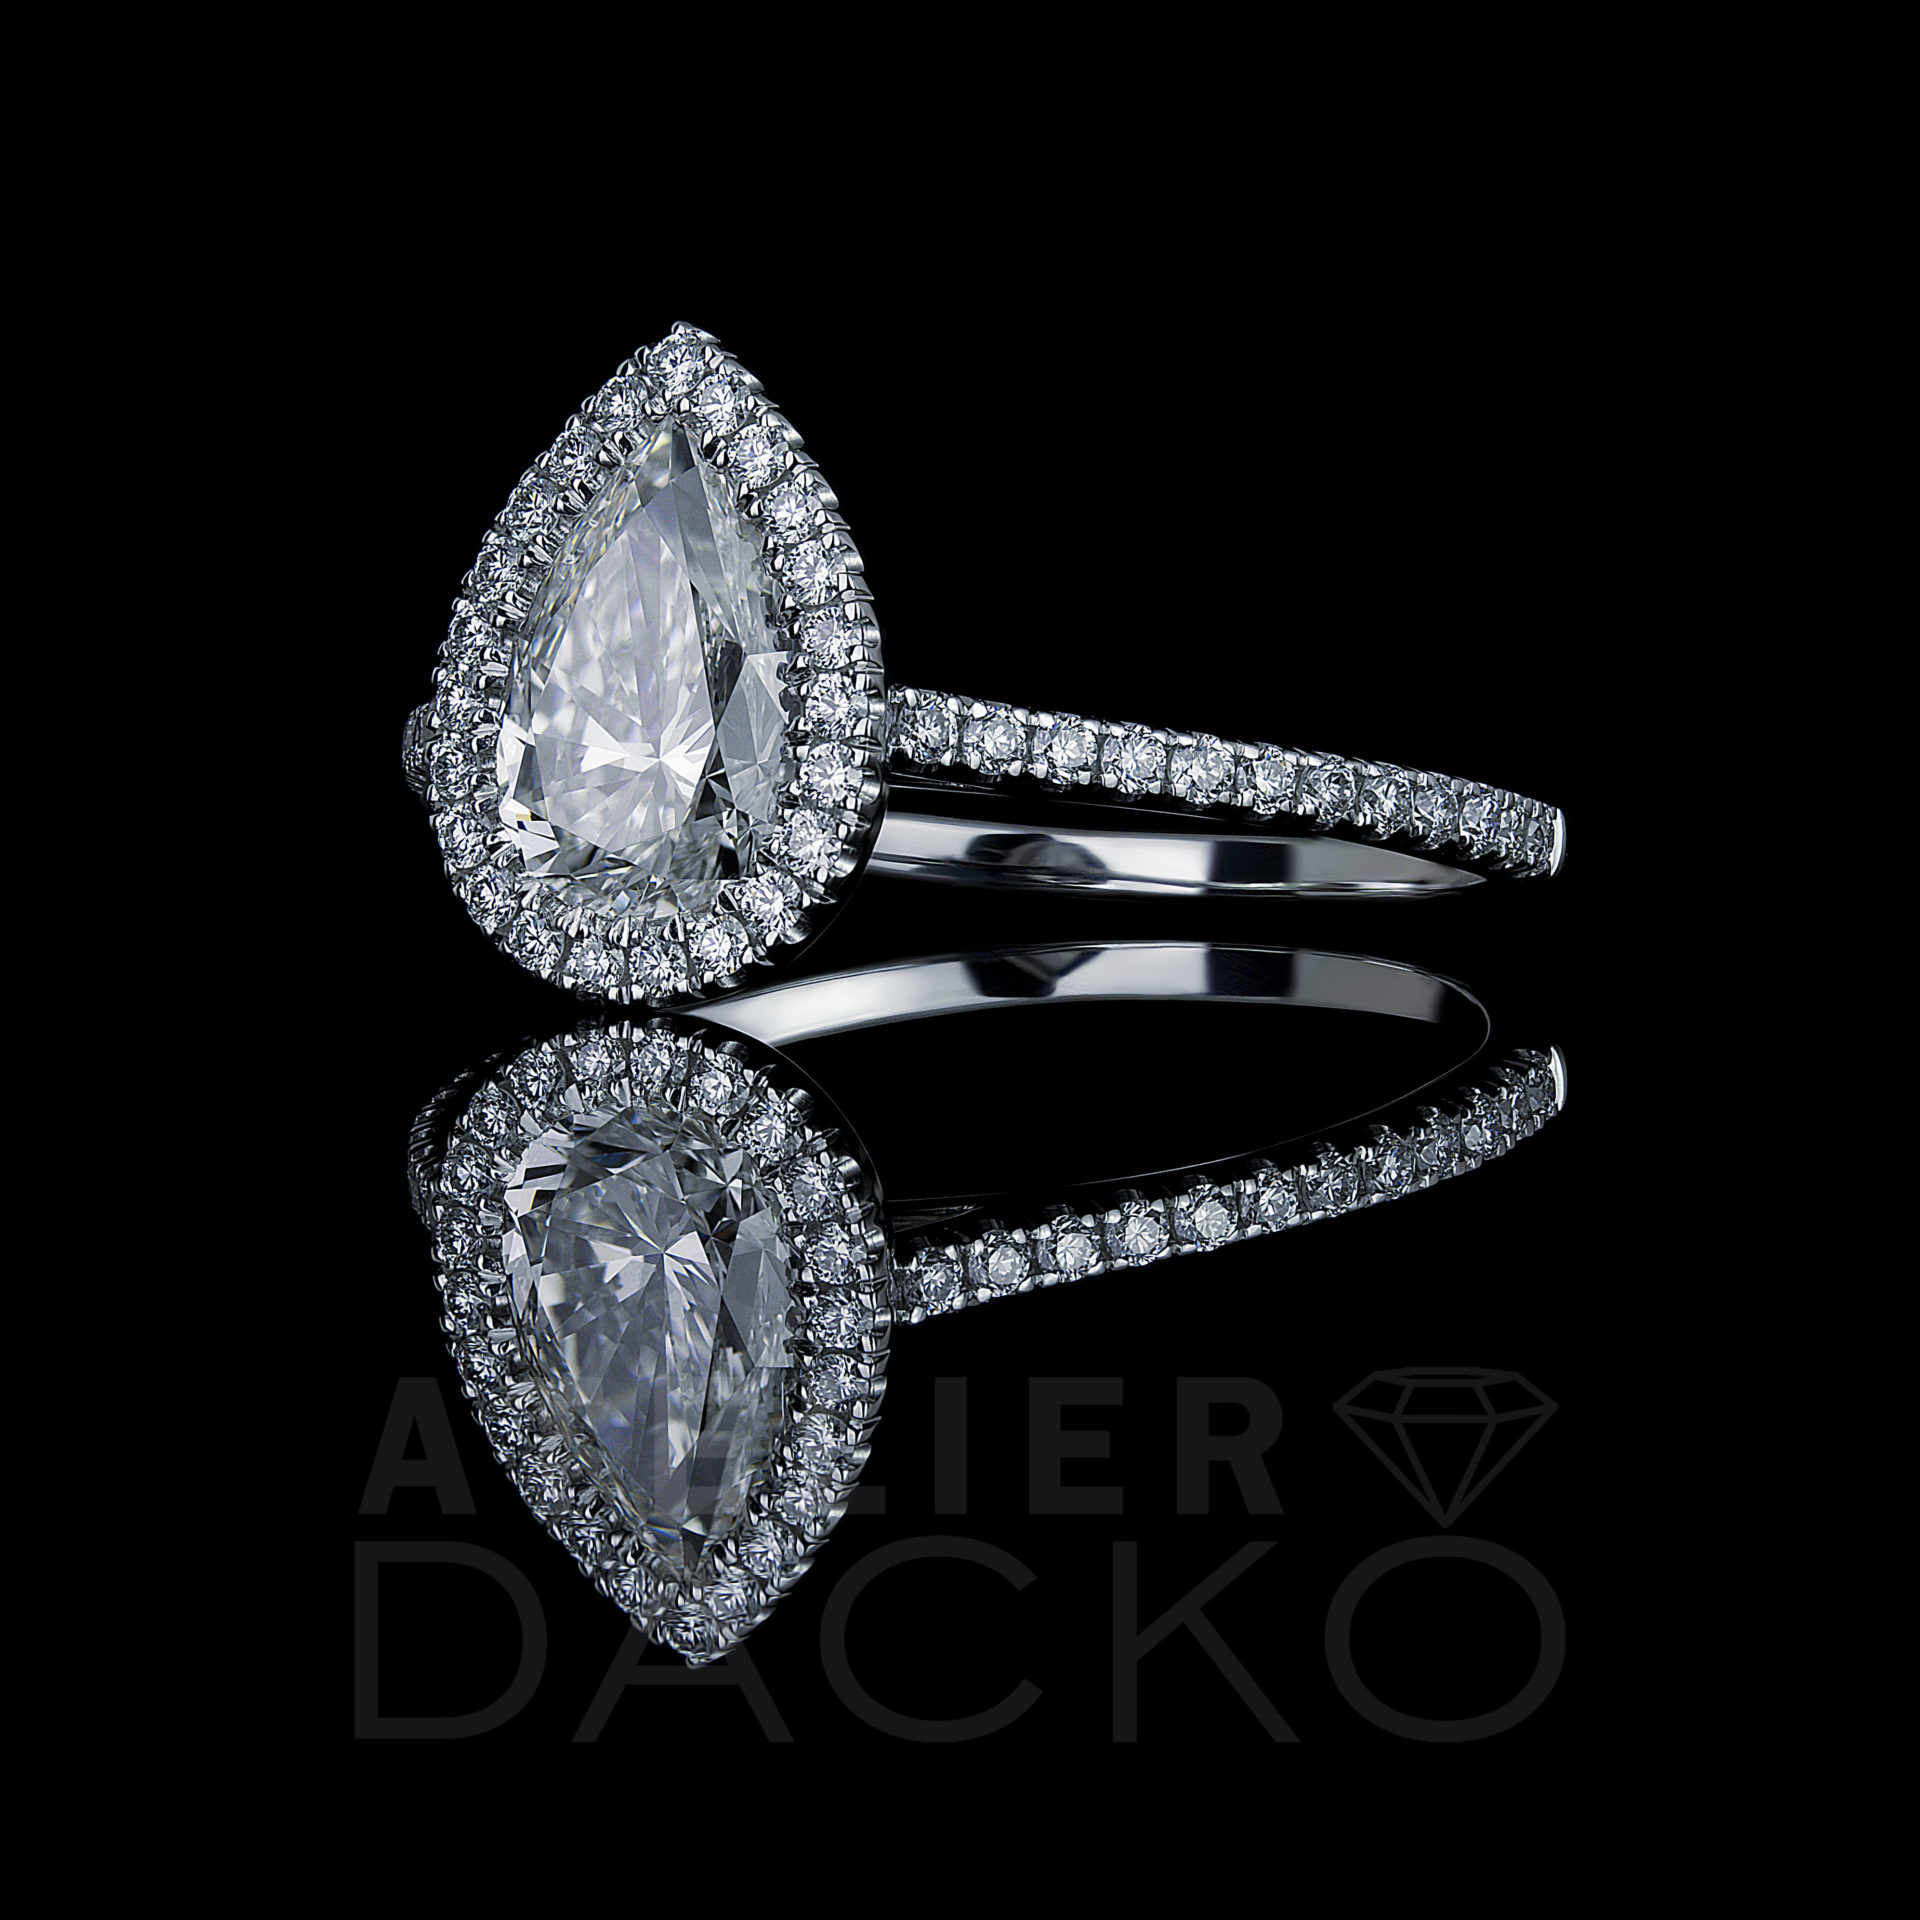 Side Facing 1.60 CT Pear Cut Diamond Engagement Ring in a Clawless Halo Setting